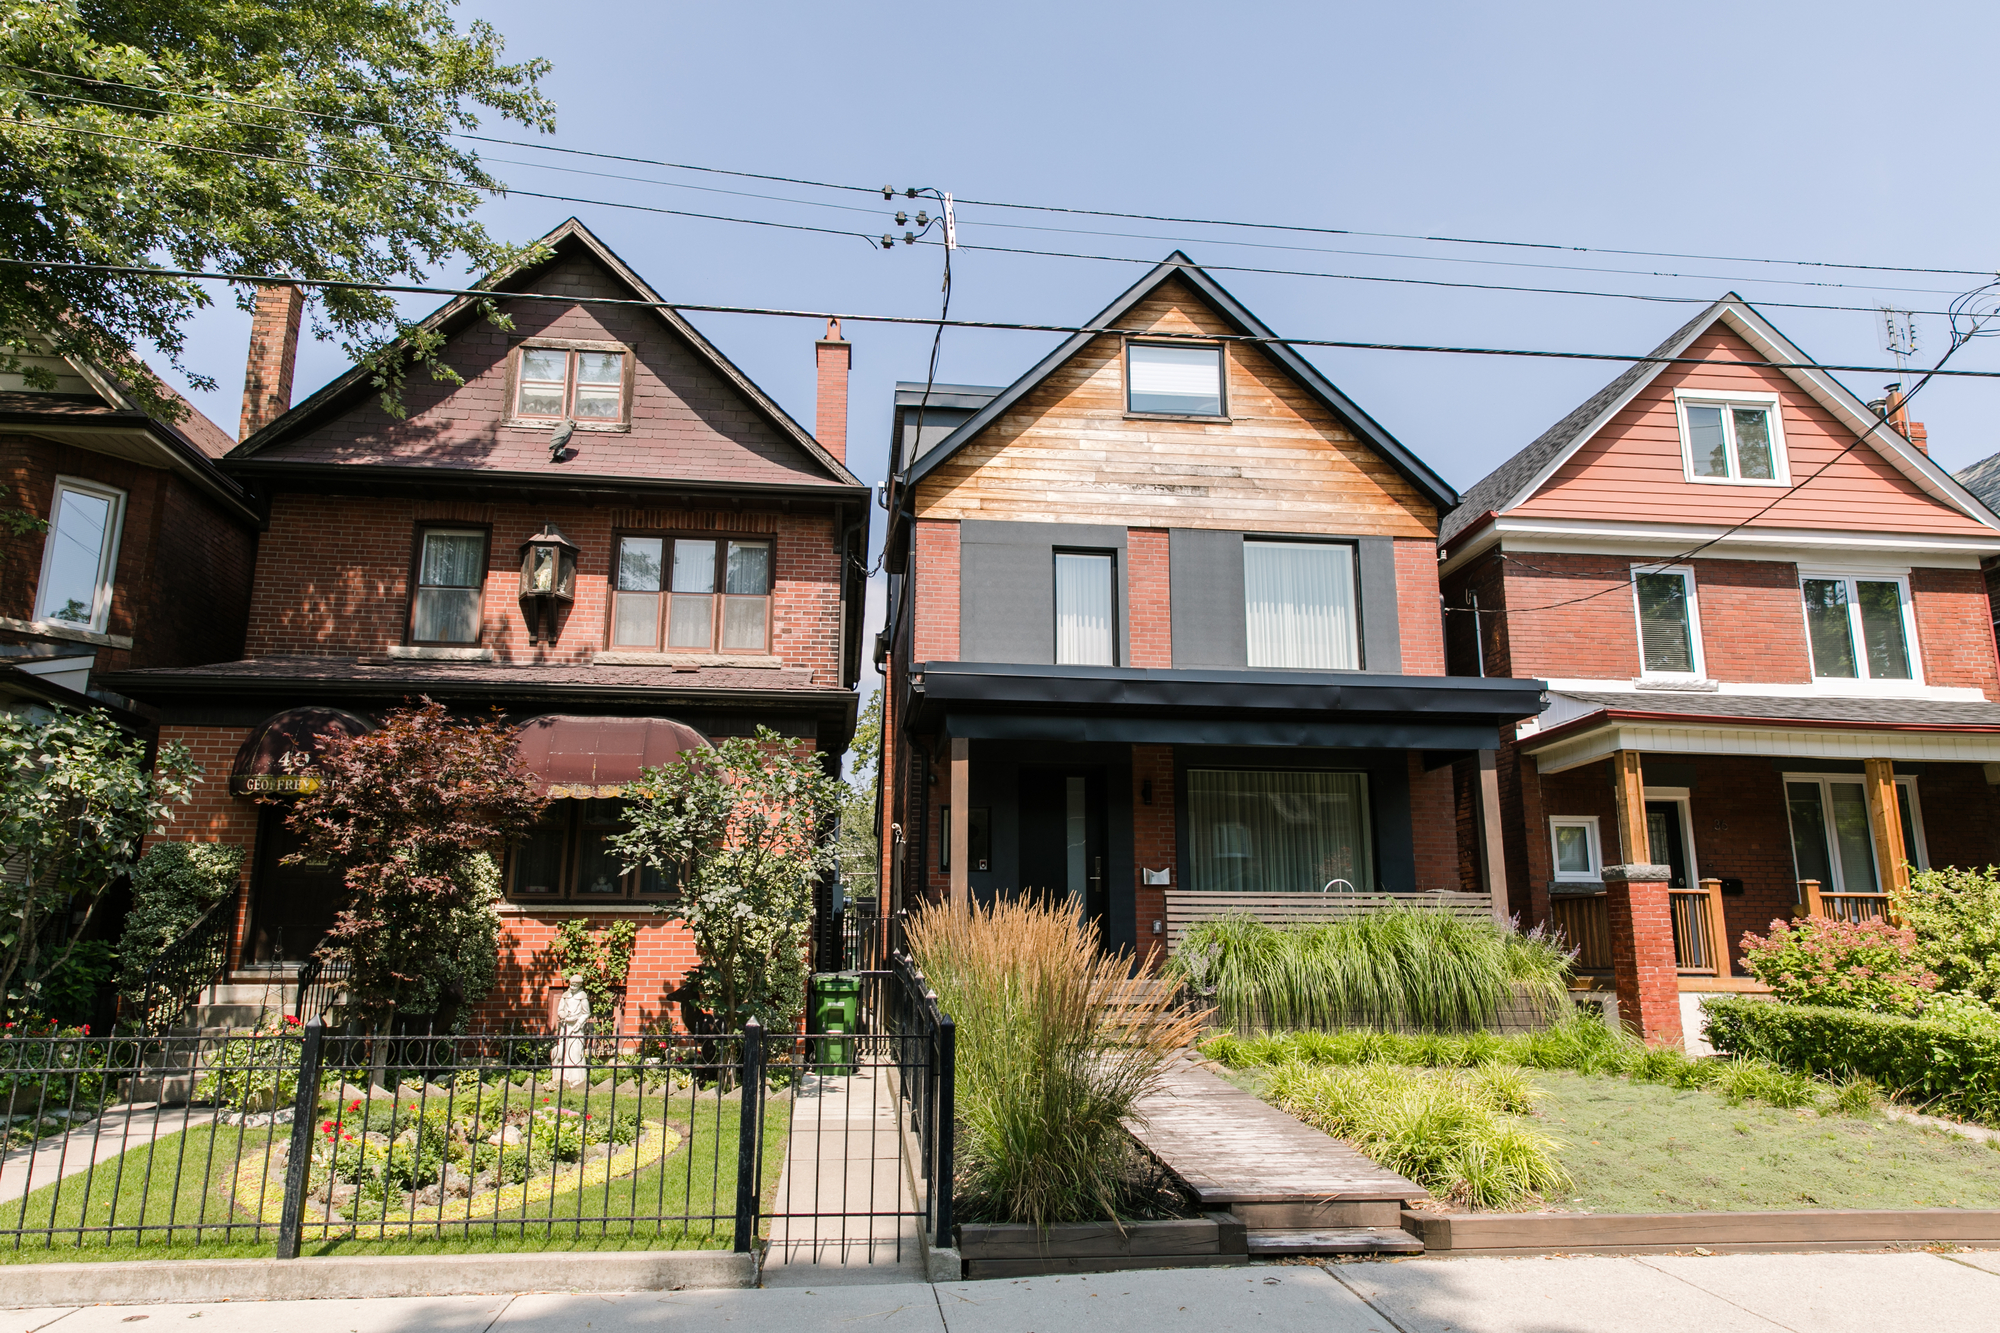 A row of brown houses on a street in toronto.